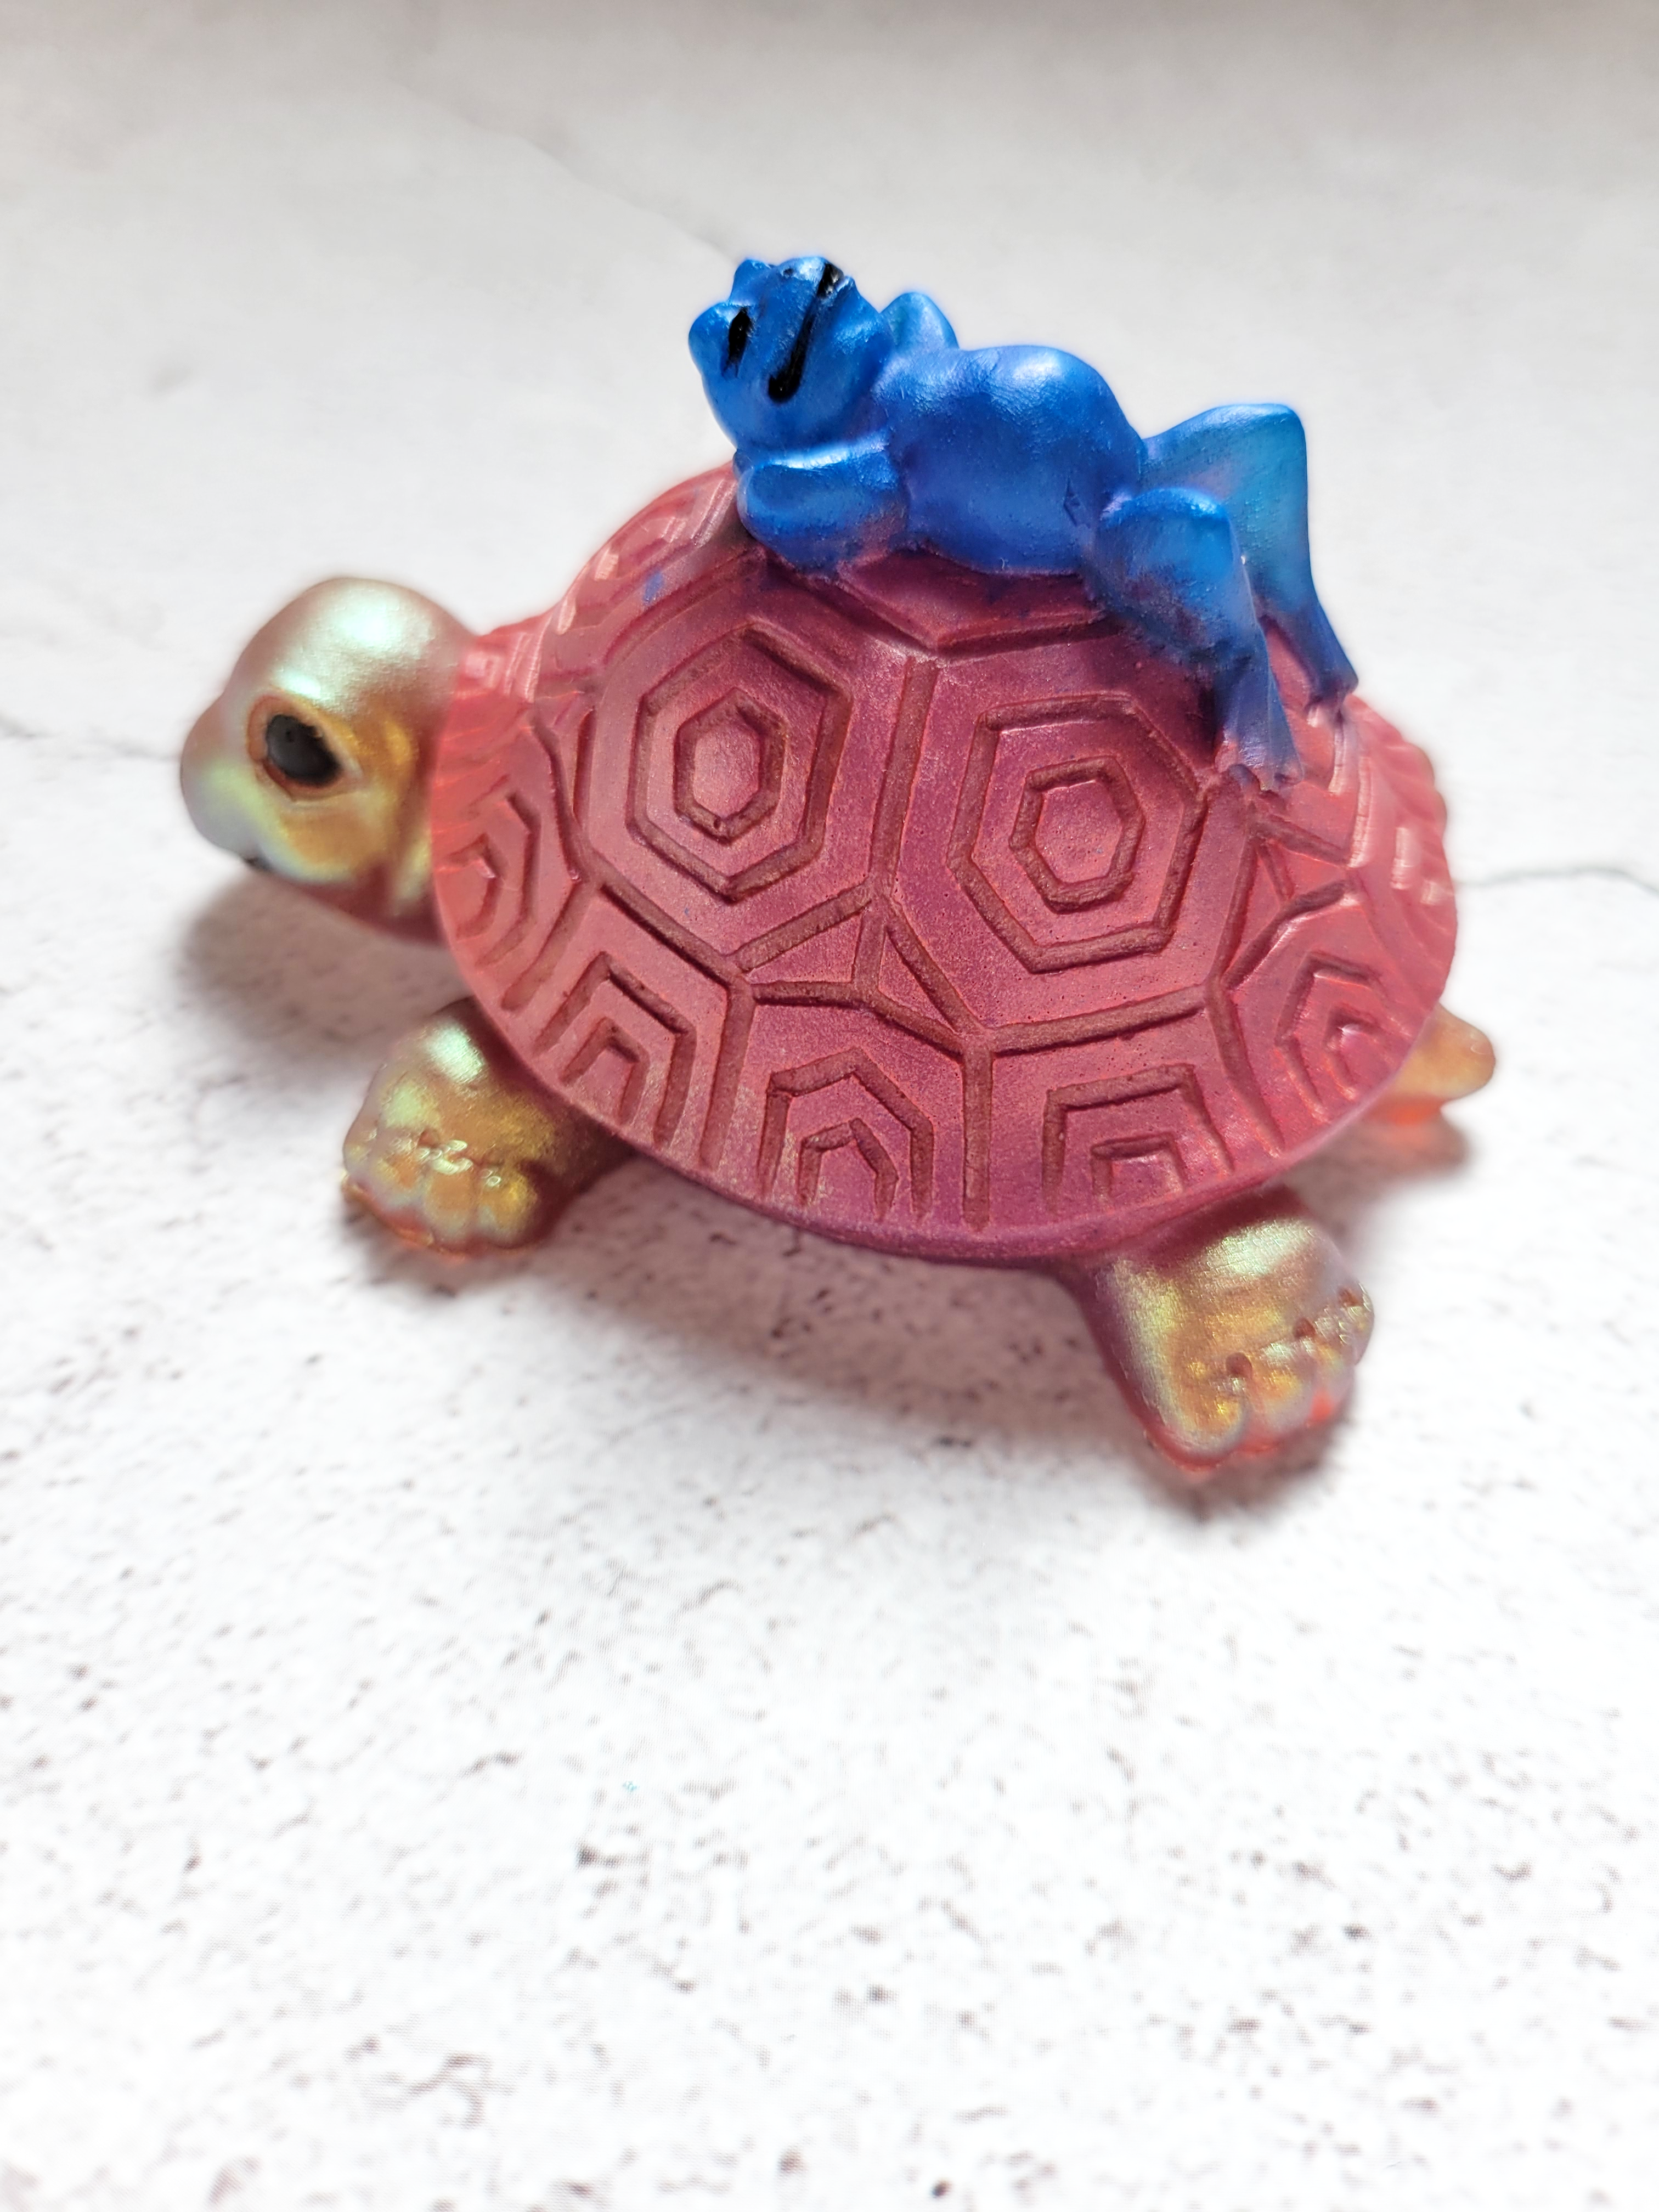 A side view of a turtle figure with a blue frog lounging on top of its shell. The turtle is gold with a reddish shell, with black eyes and nostrils.